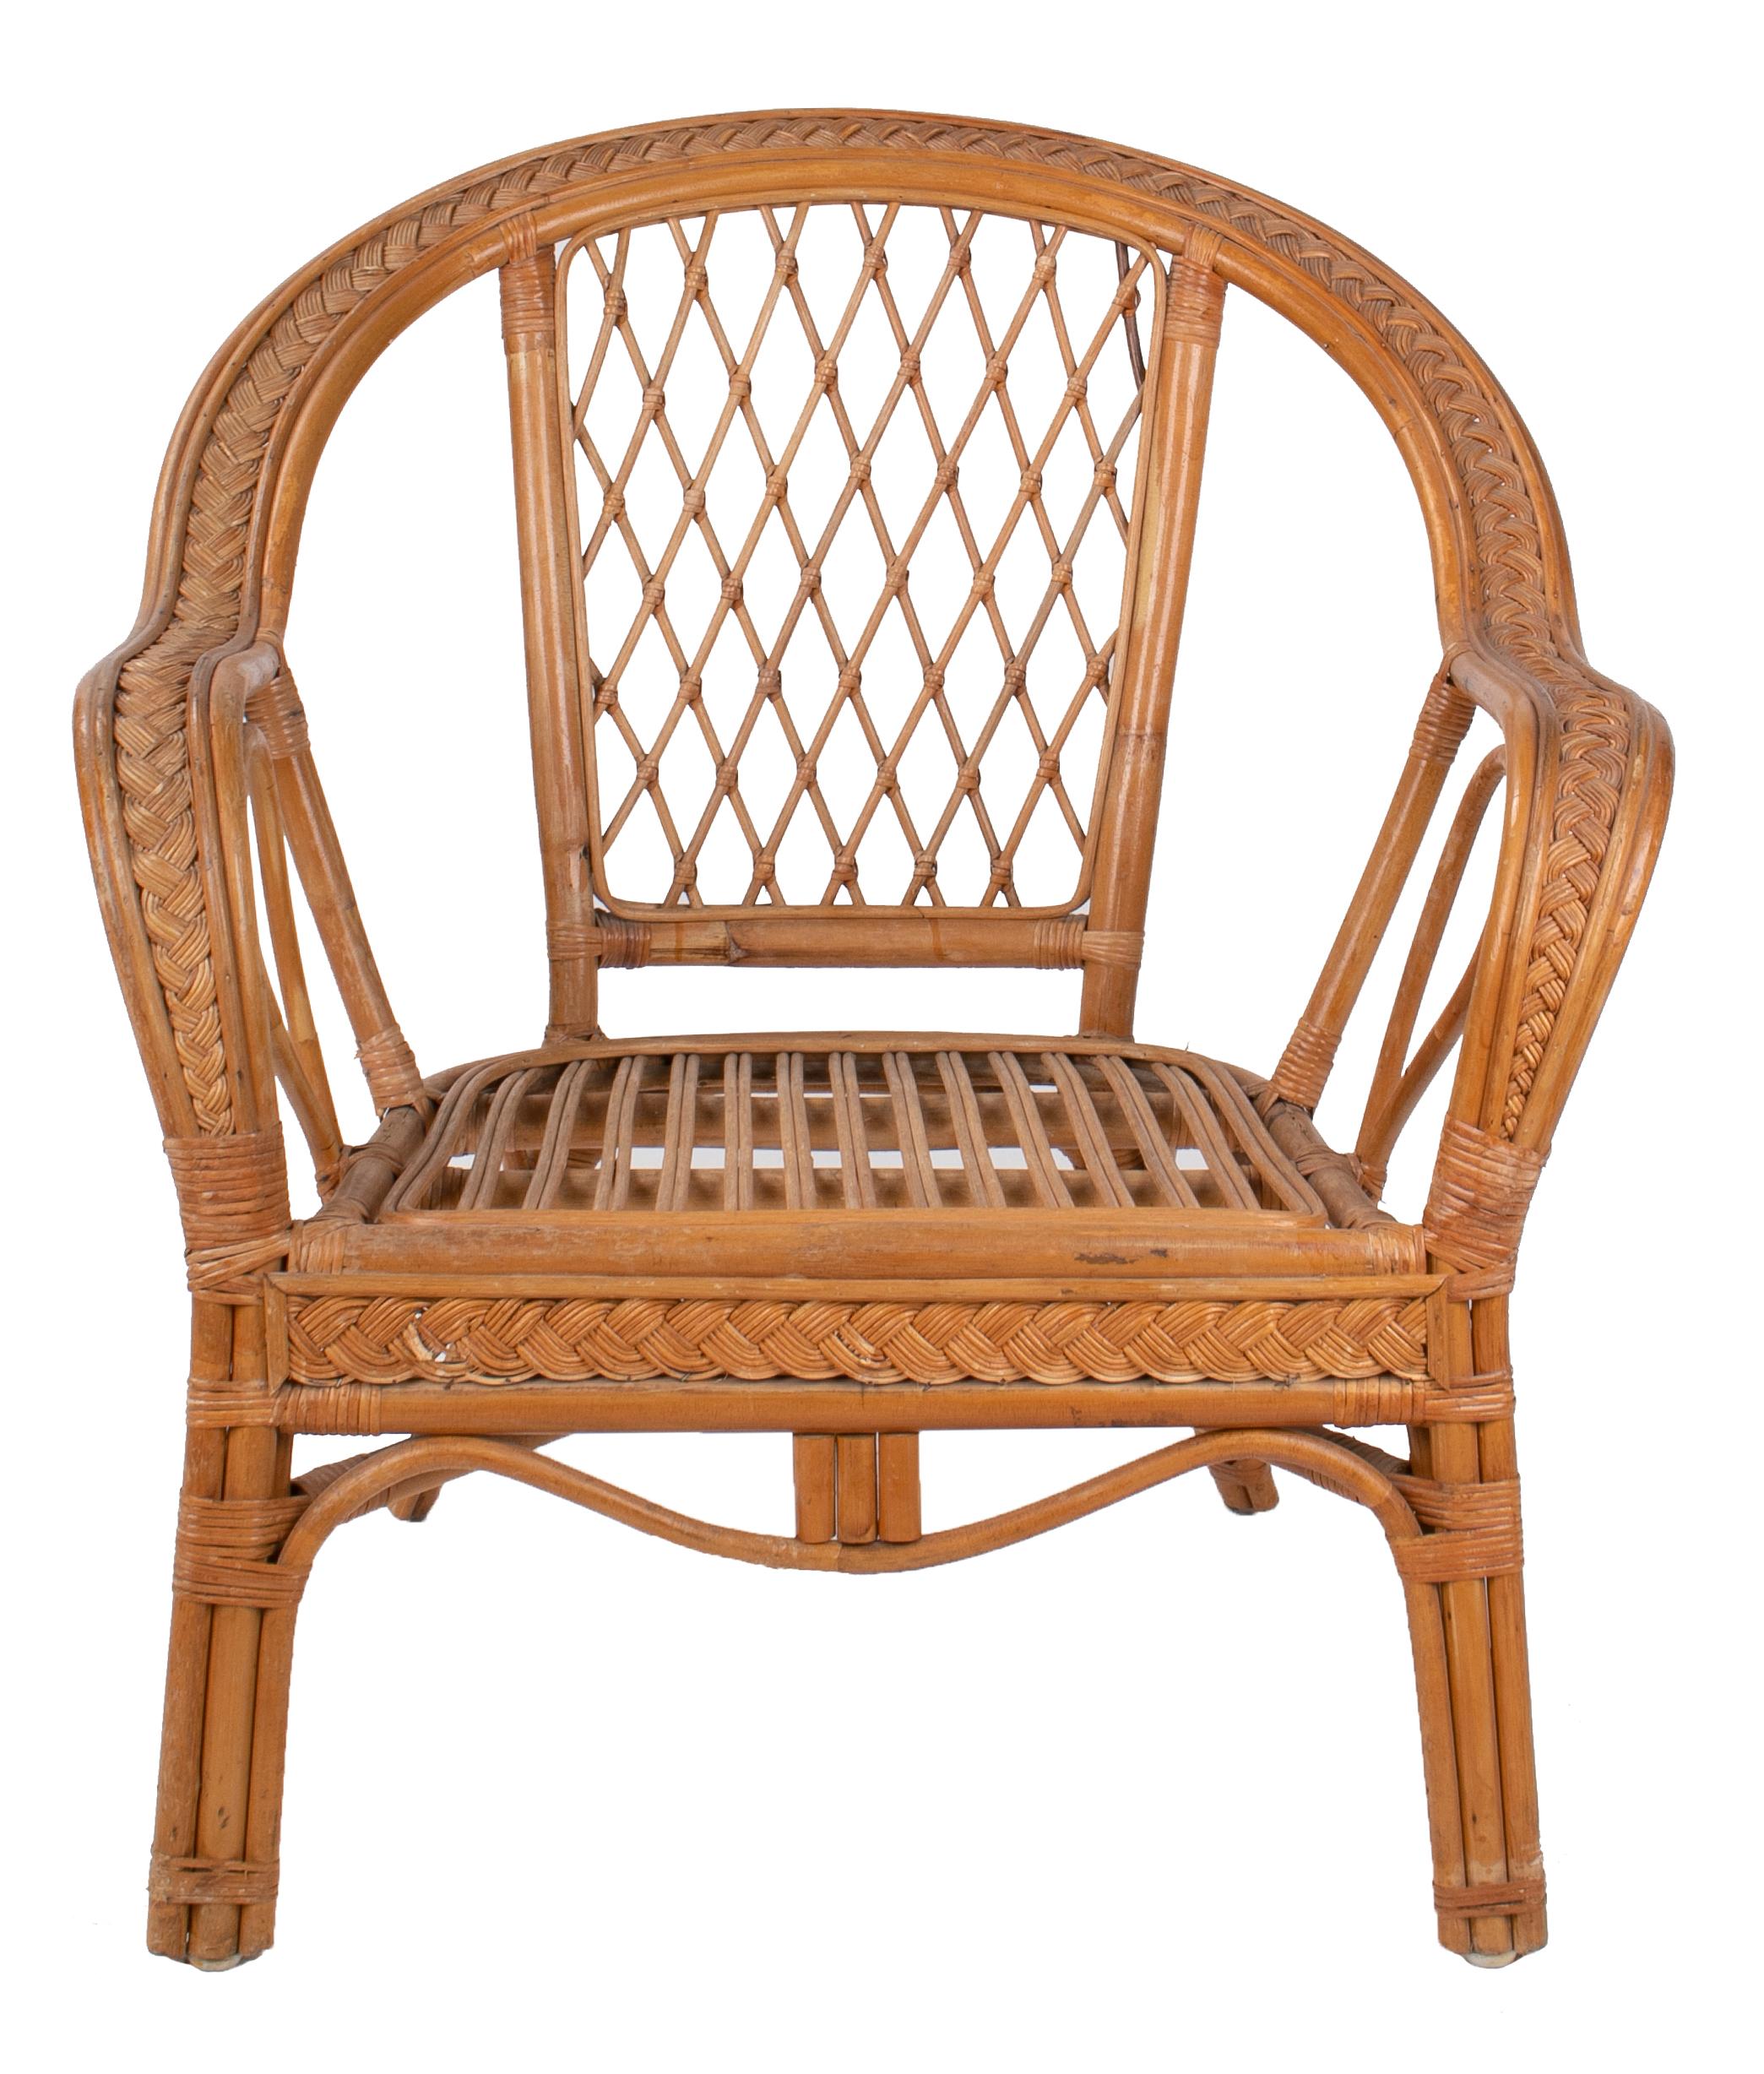 1980s Spanish wicker and bamboo decorated wooden armchair.